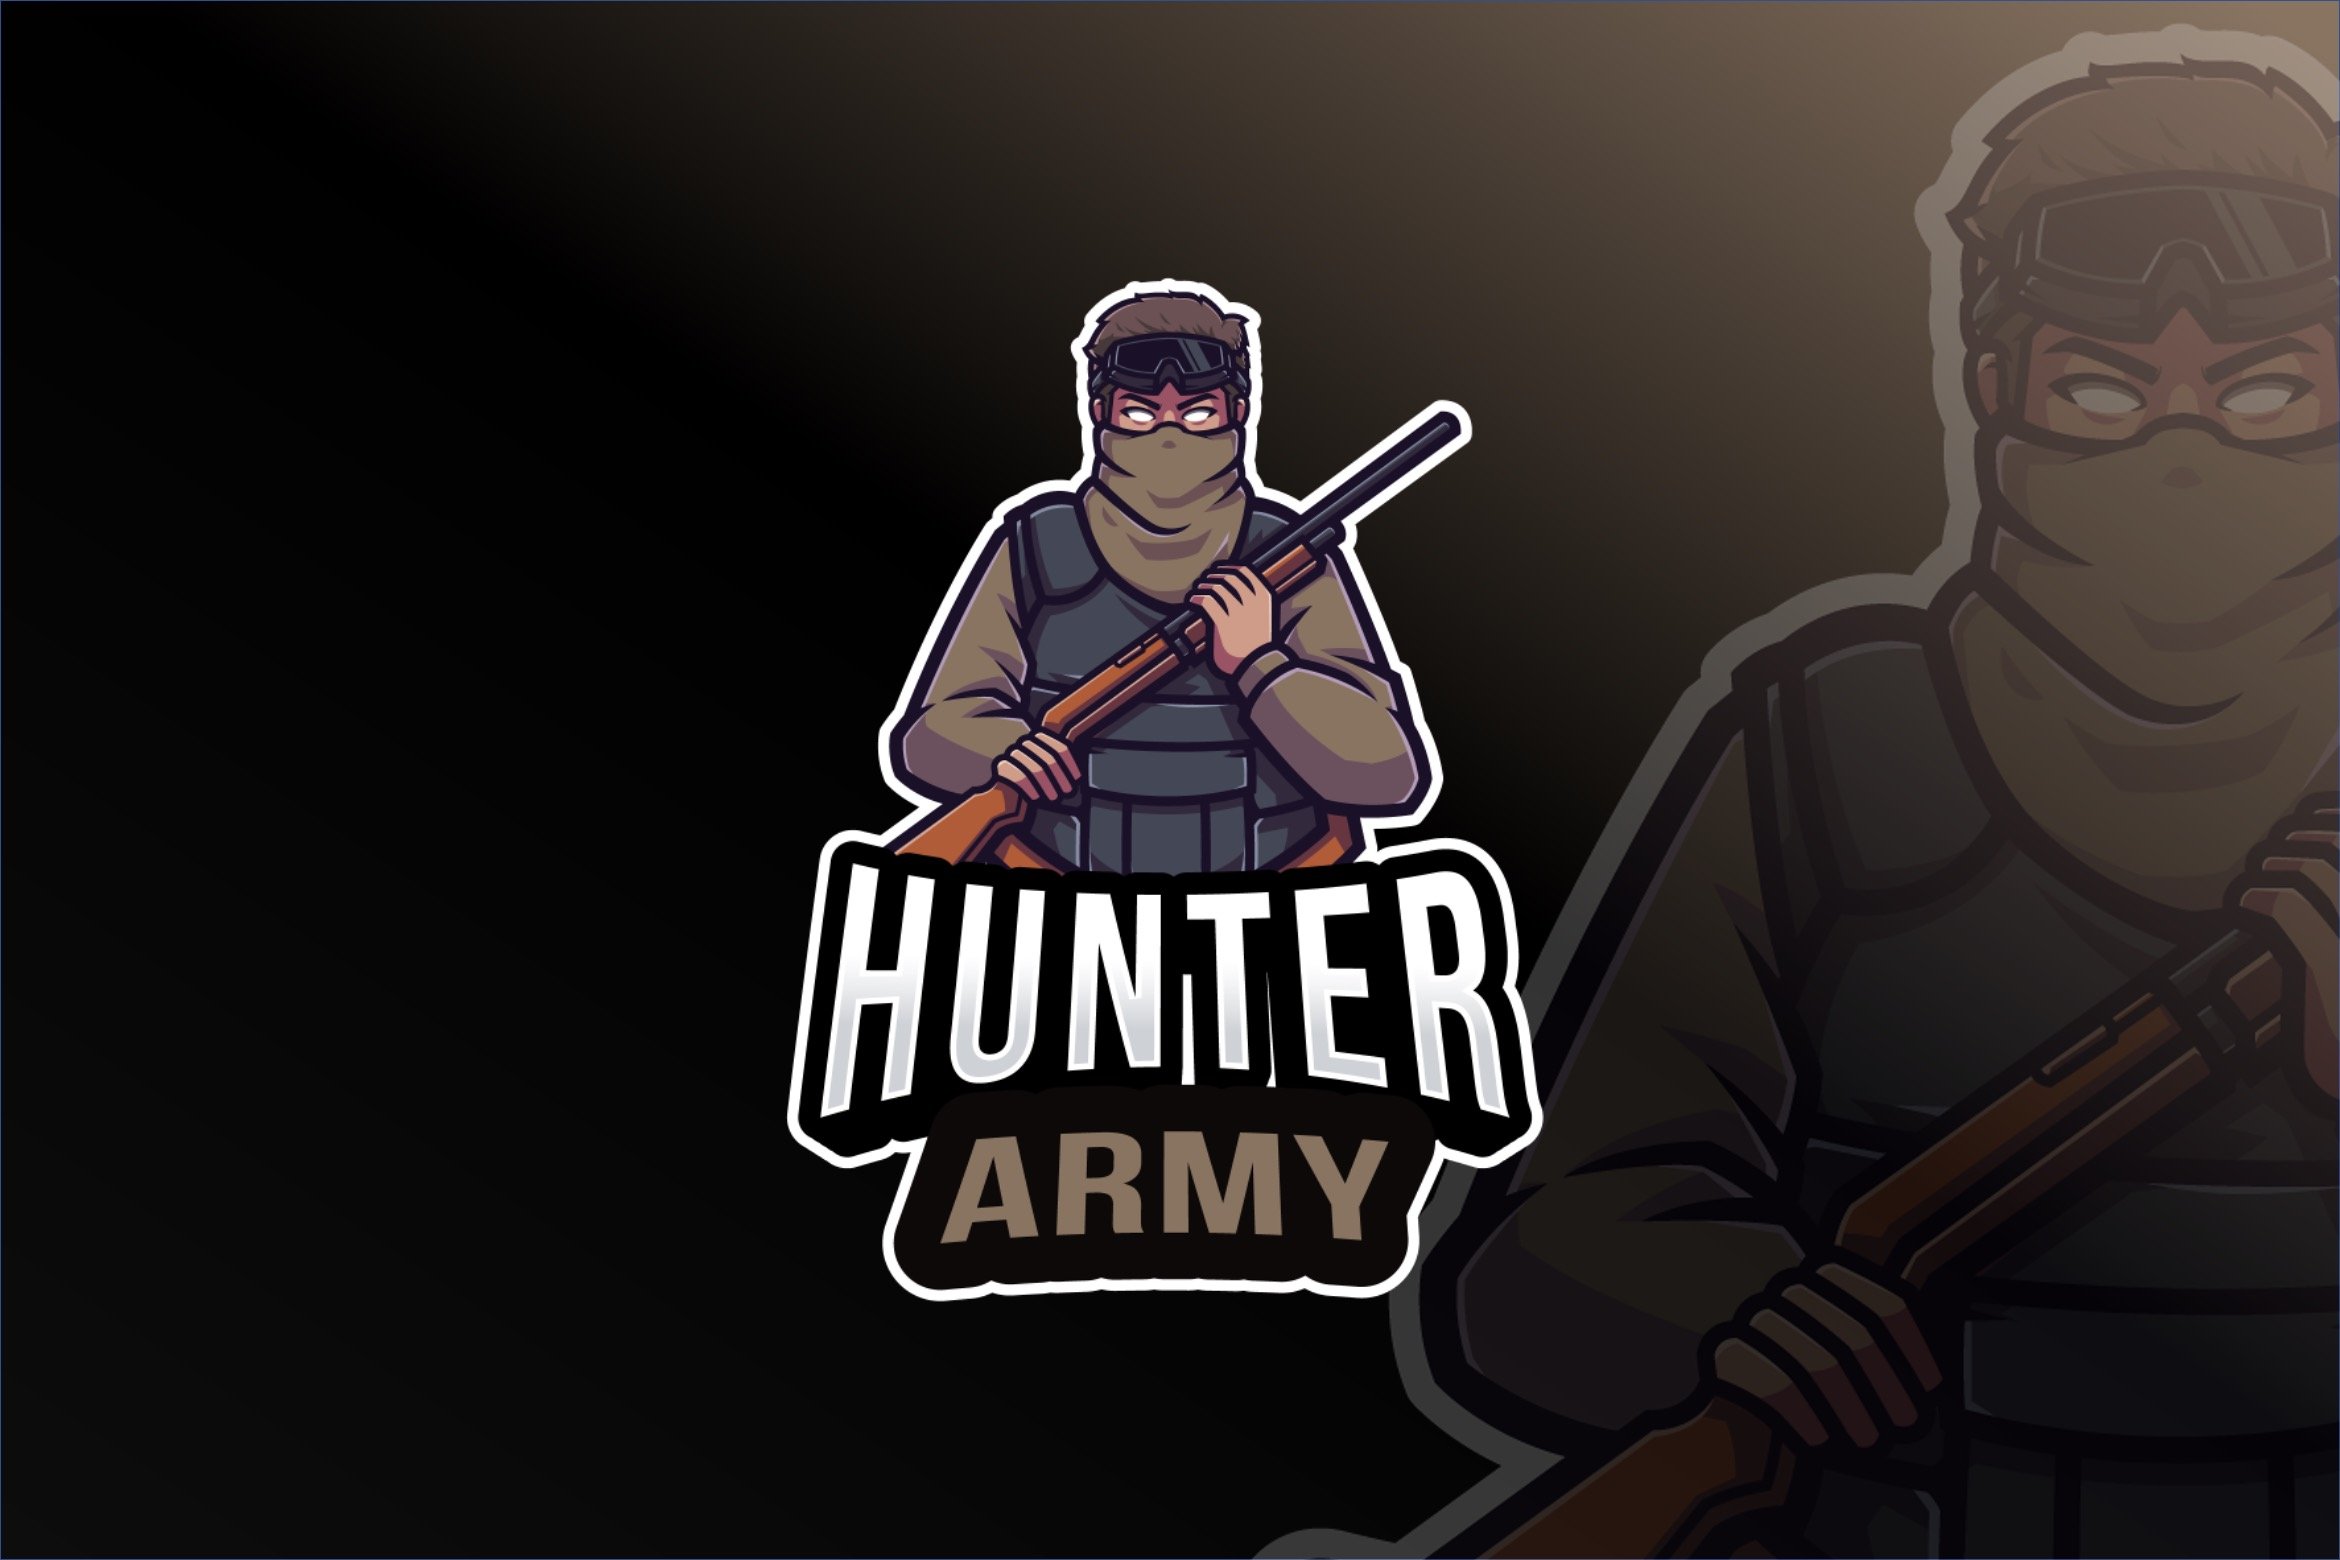 Hunter Army Logo Template cover image.